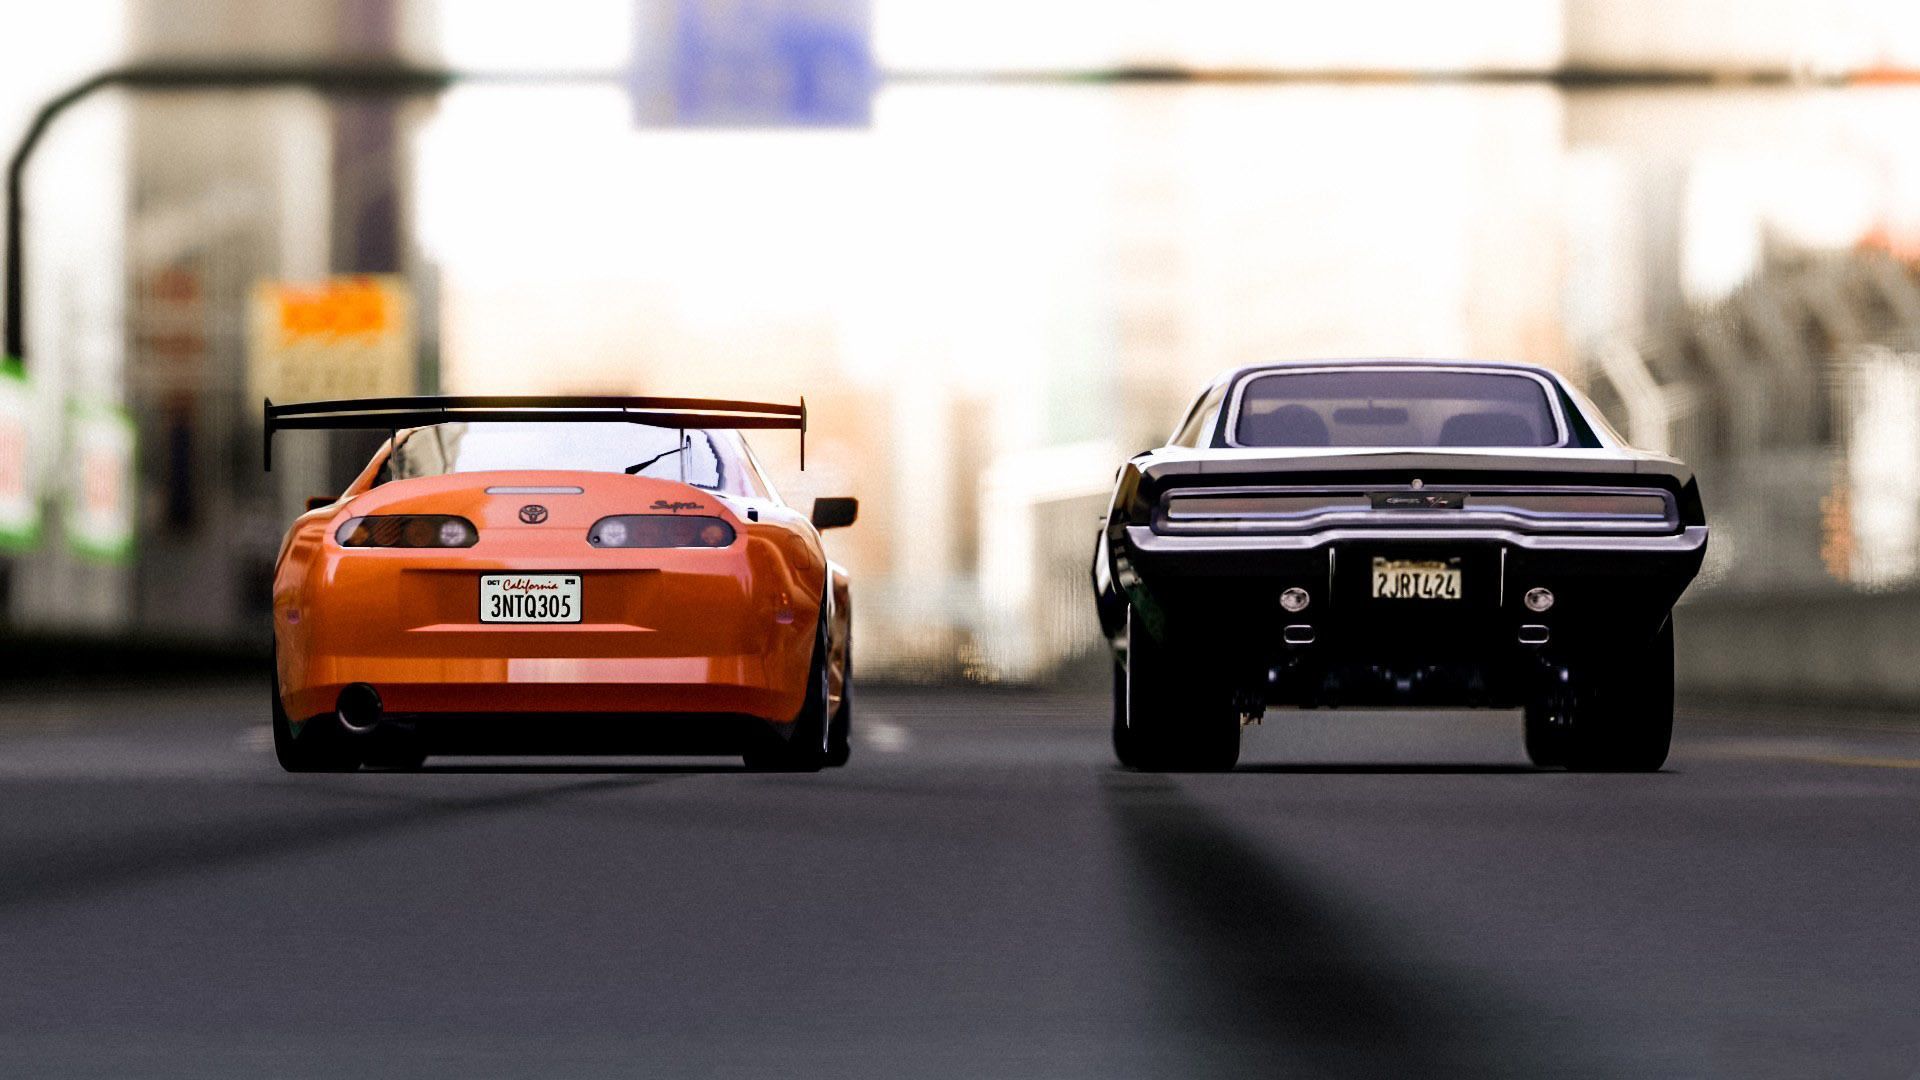 Supra Drift Wallpaper For iPhone #FfK. Cars movie, Fast and furious, Toyota supra